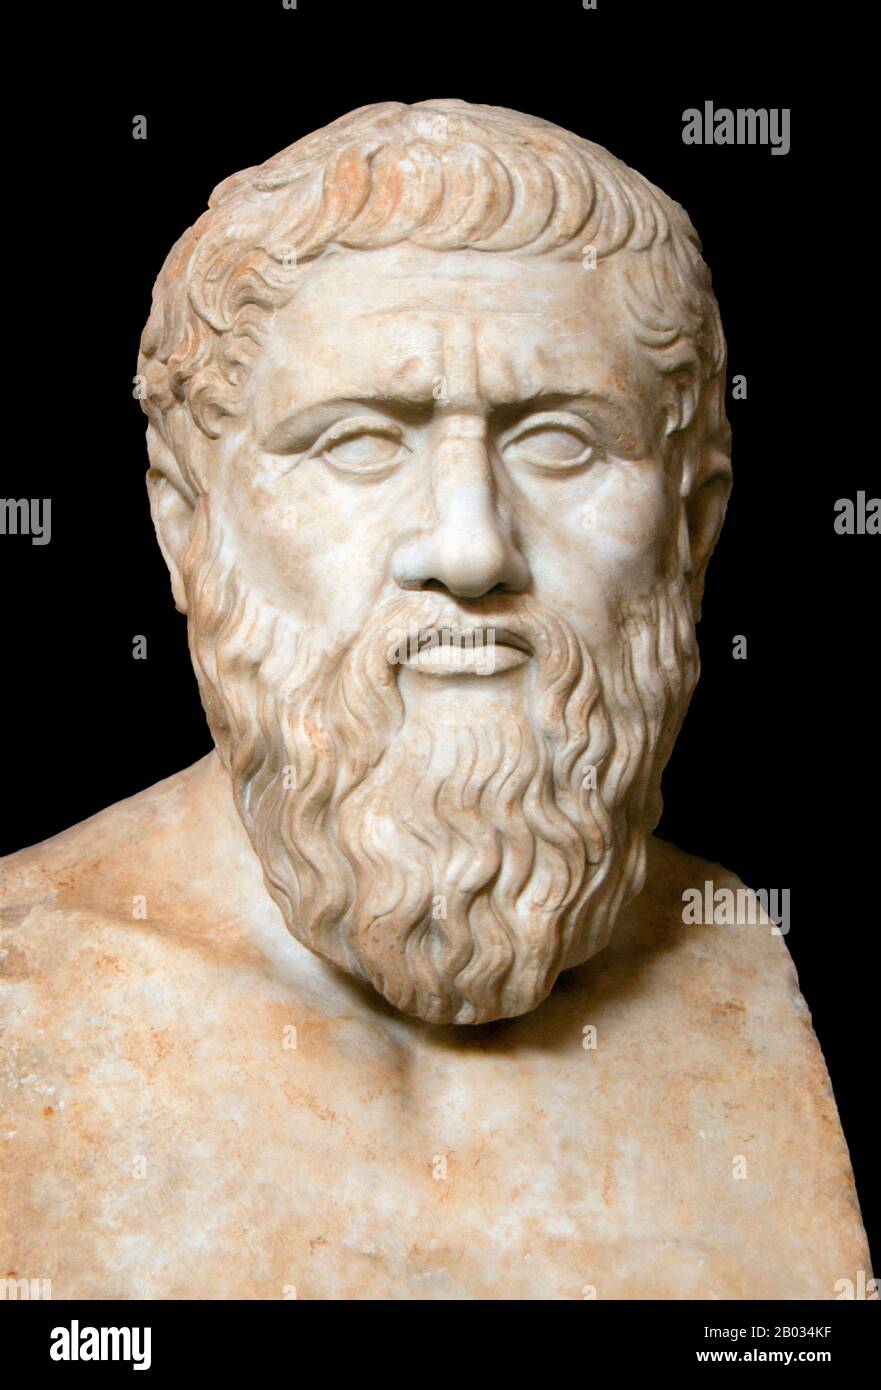 Plato (428/427 or 424/423 – 348/347 BCE) was a philosopher in Classical Greece and the founder of the Academy in Athens, the first institution of higher learning in the Western world. He is widely considered the most pivotal figure in the development of philosophy, especially the Western tradition. Unlike nearly all of his philosophical contemporaries, Plato's entire œuvre is believed to have survived intact for over 2,400 years Stock Photo